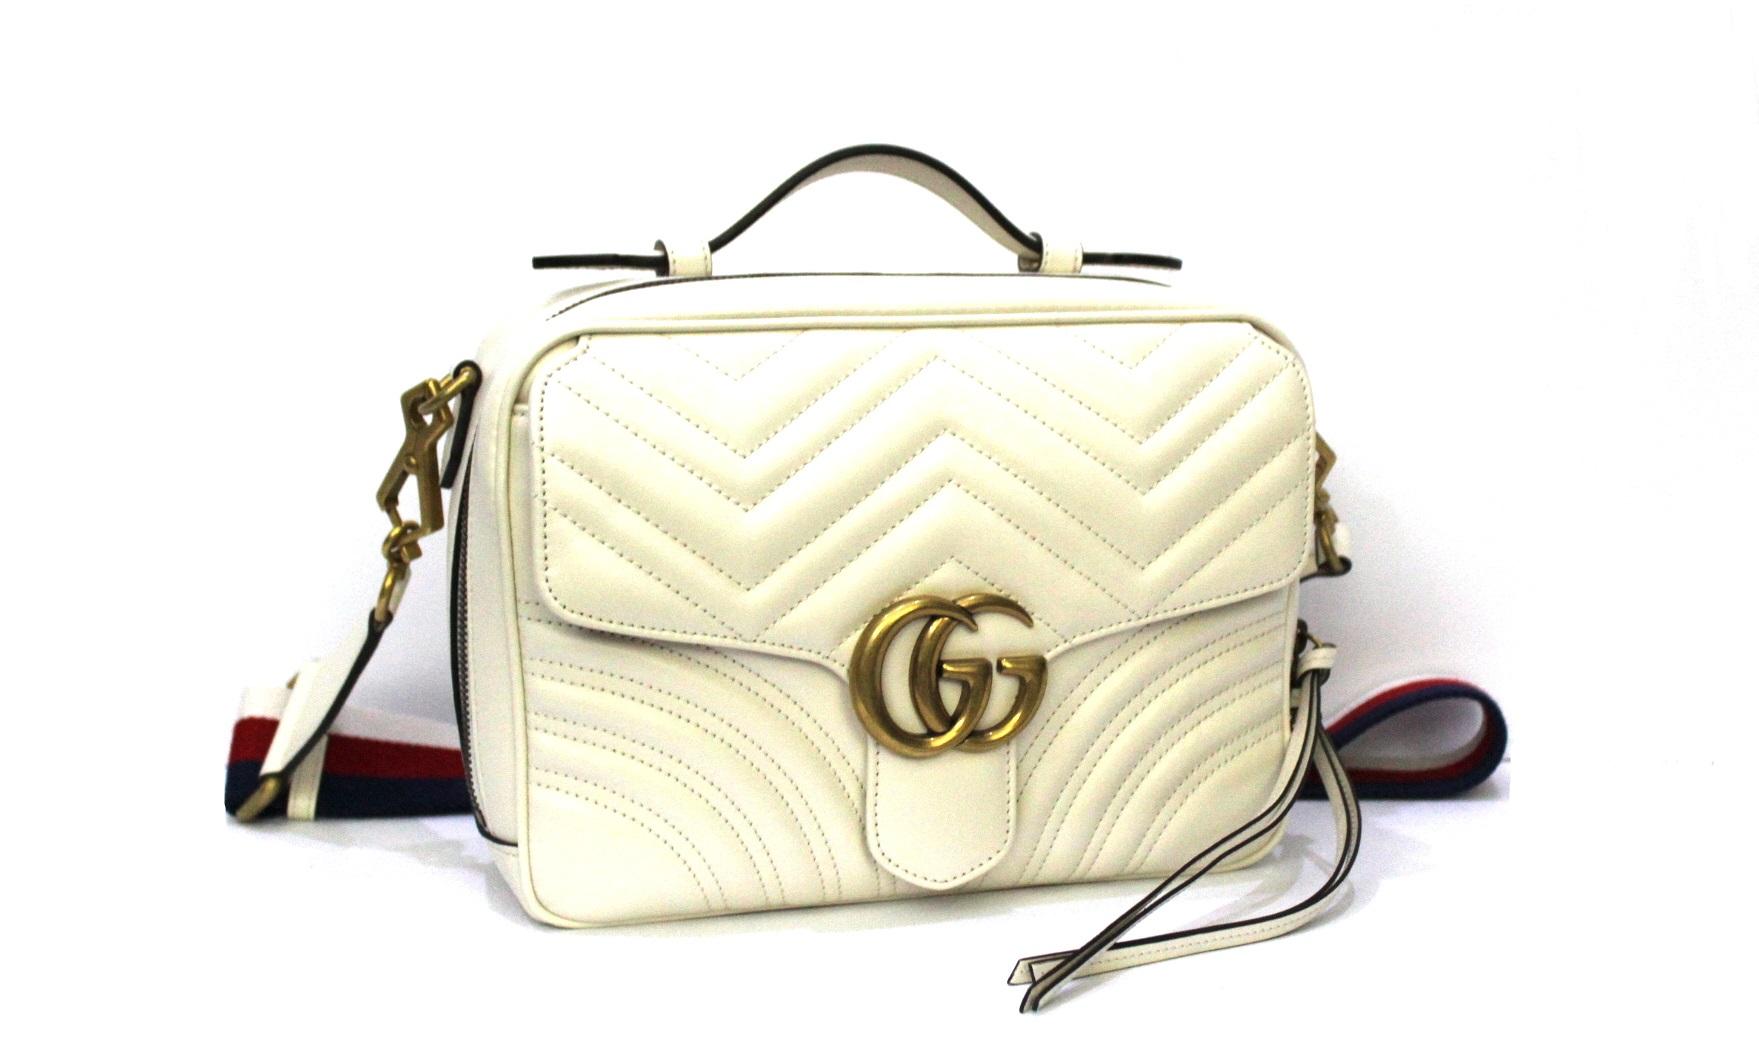 Gucci bag Marmont line made of white leather with golden hardware.
Equipped with top handle and removable web band shoulder strap.
Zip closure, internally large enough. Equipped with front pocket with flap.
The bag is in excellent condition.